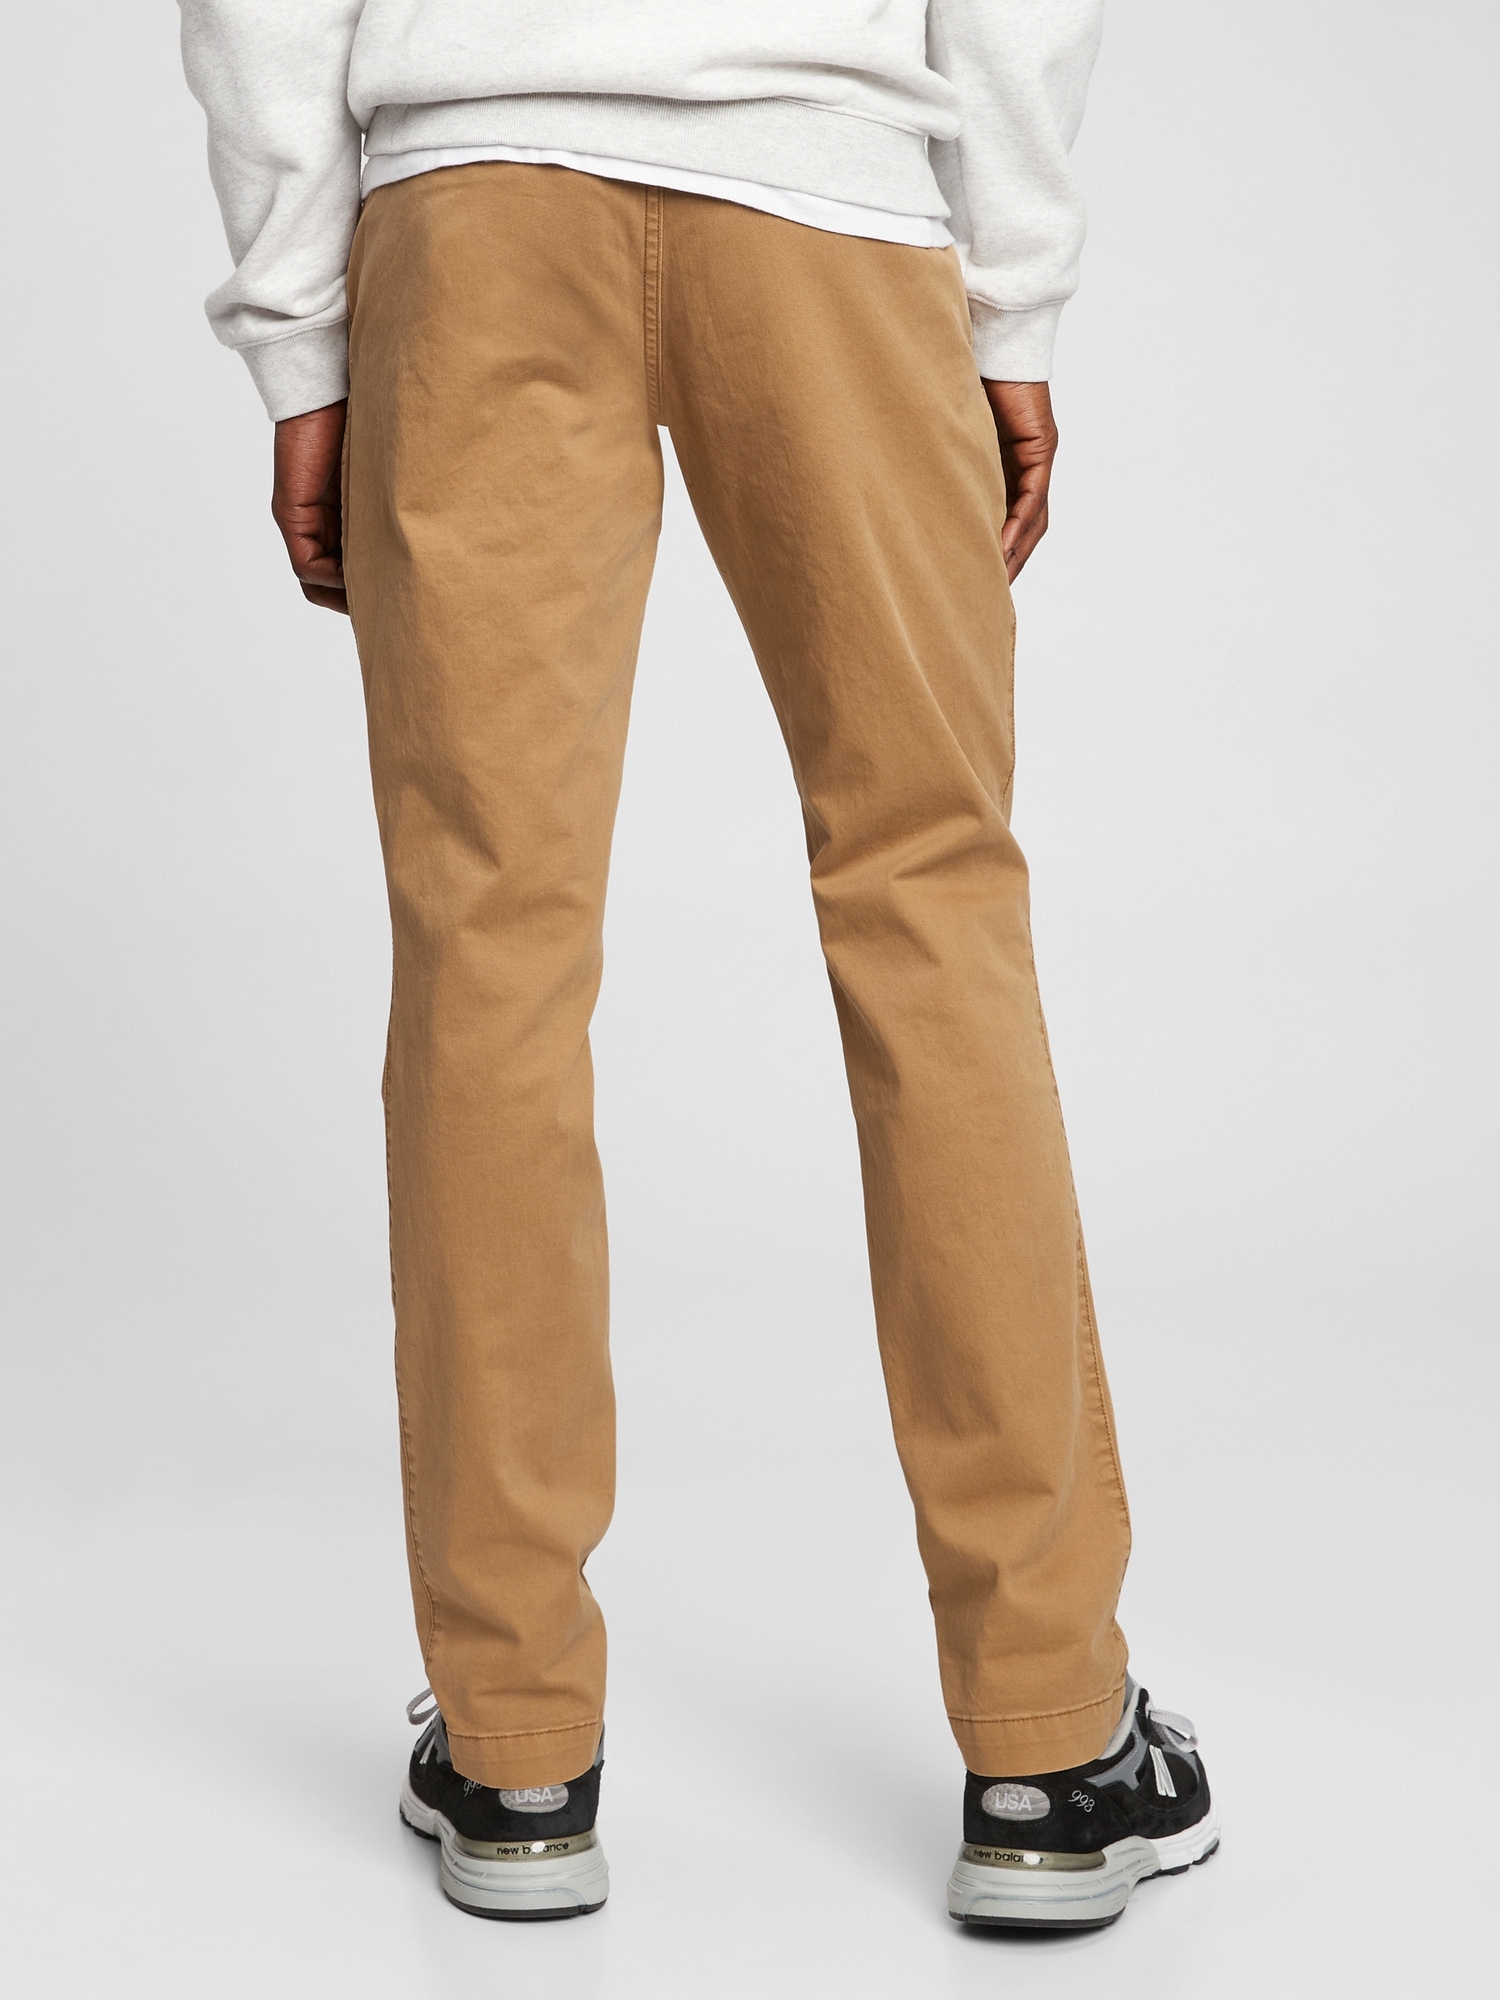 Gap Vintage Khakis in Relaxed Fit with GapFlex - ShopStyle